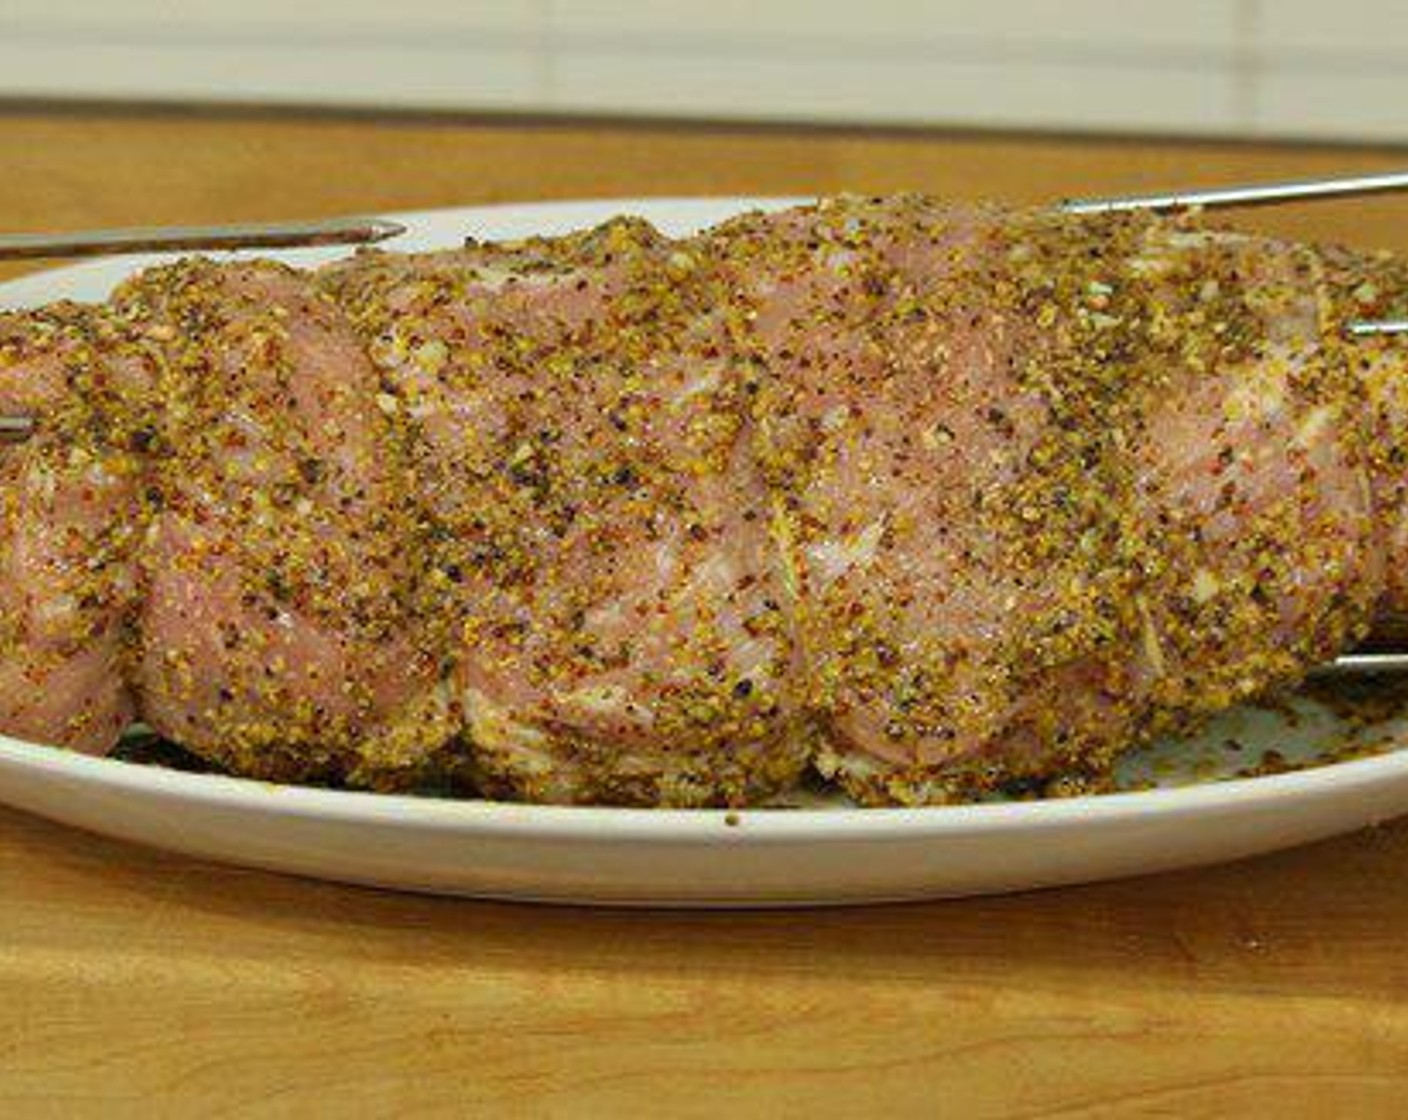 step 2 Once the pork loin is tied up and ready, it’s time to season. Stone Ground Mustard (1 cup), Honey (2 Tbsp), Garlic (4 cloves), Salt (1/2 tsp), Ground Black Pepper (1/2 tsp), and slather over pork loin. This part can get a little messy – so make sure you’ve got a nice platter to work on.